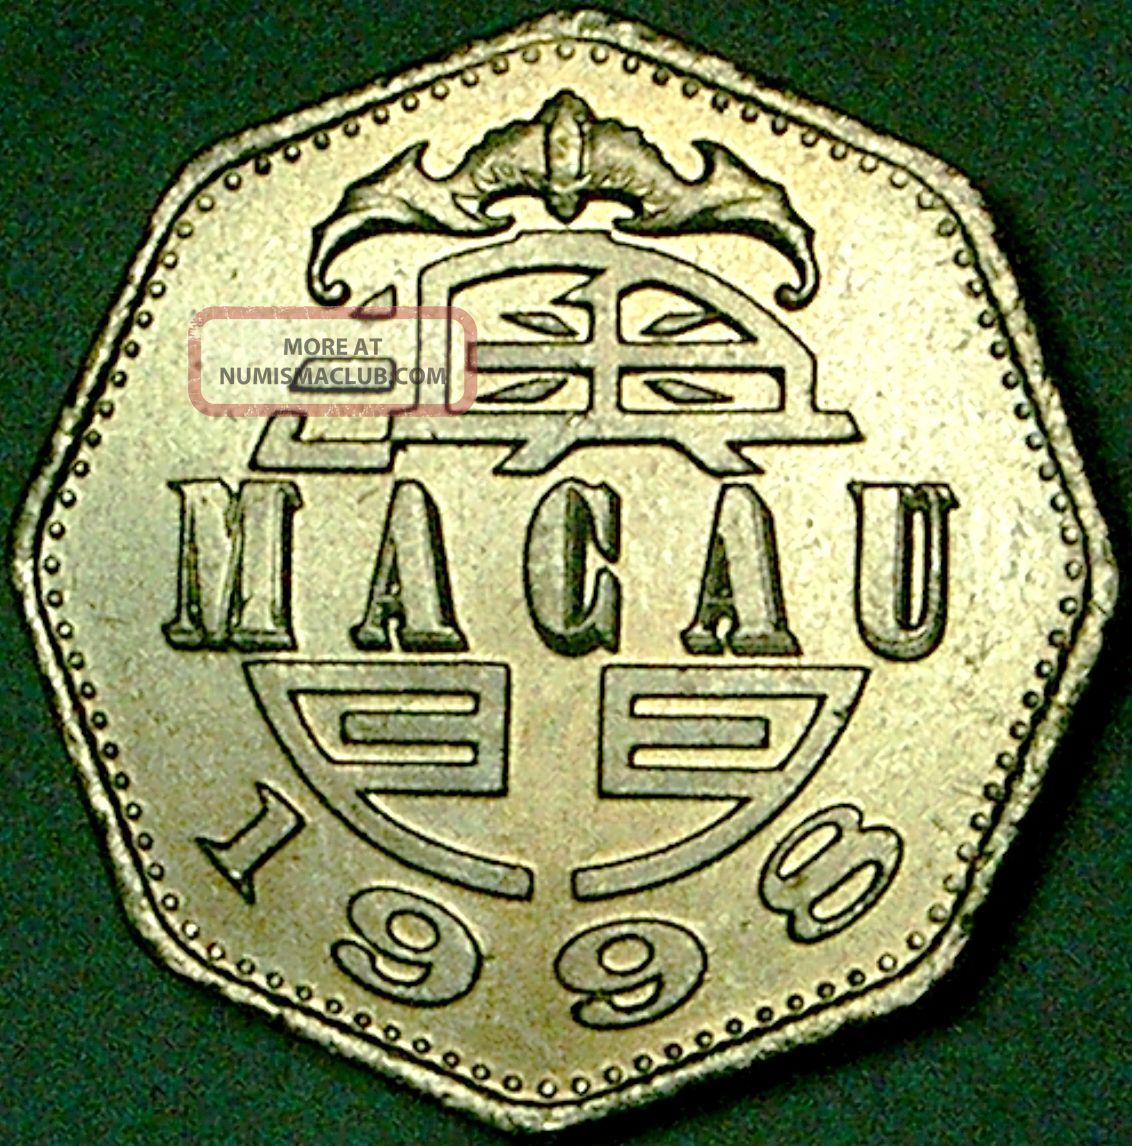 Macao 1998 2 Patacas Portugal - China - - - Unreleased Issue